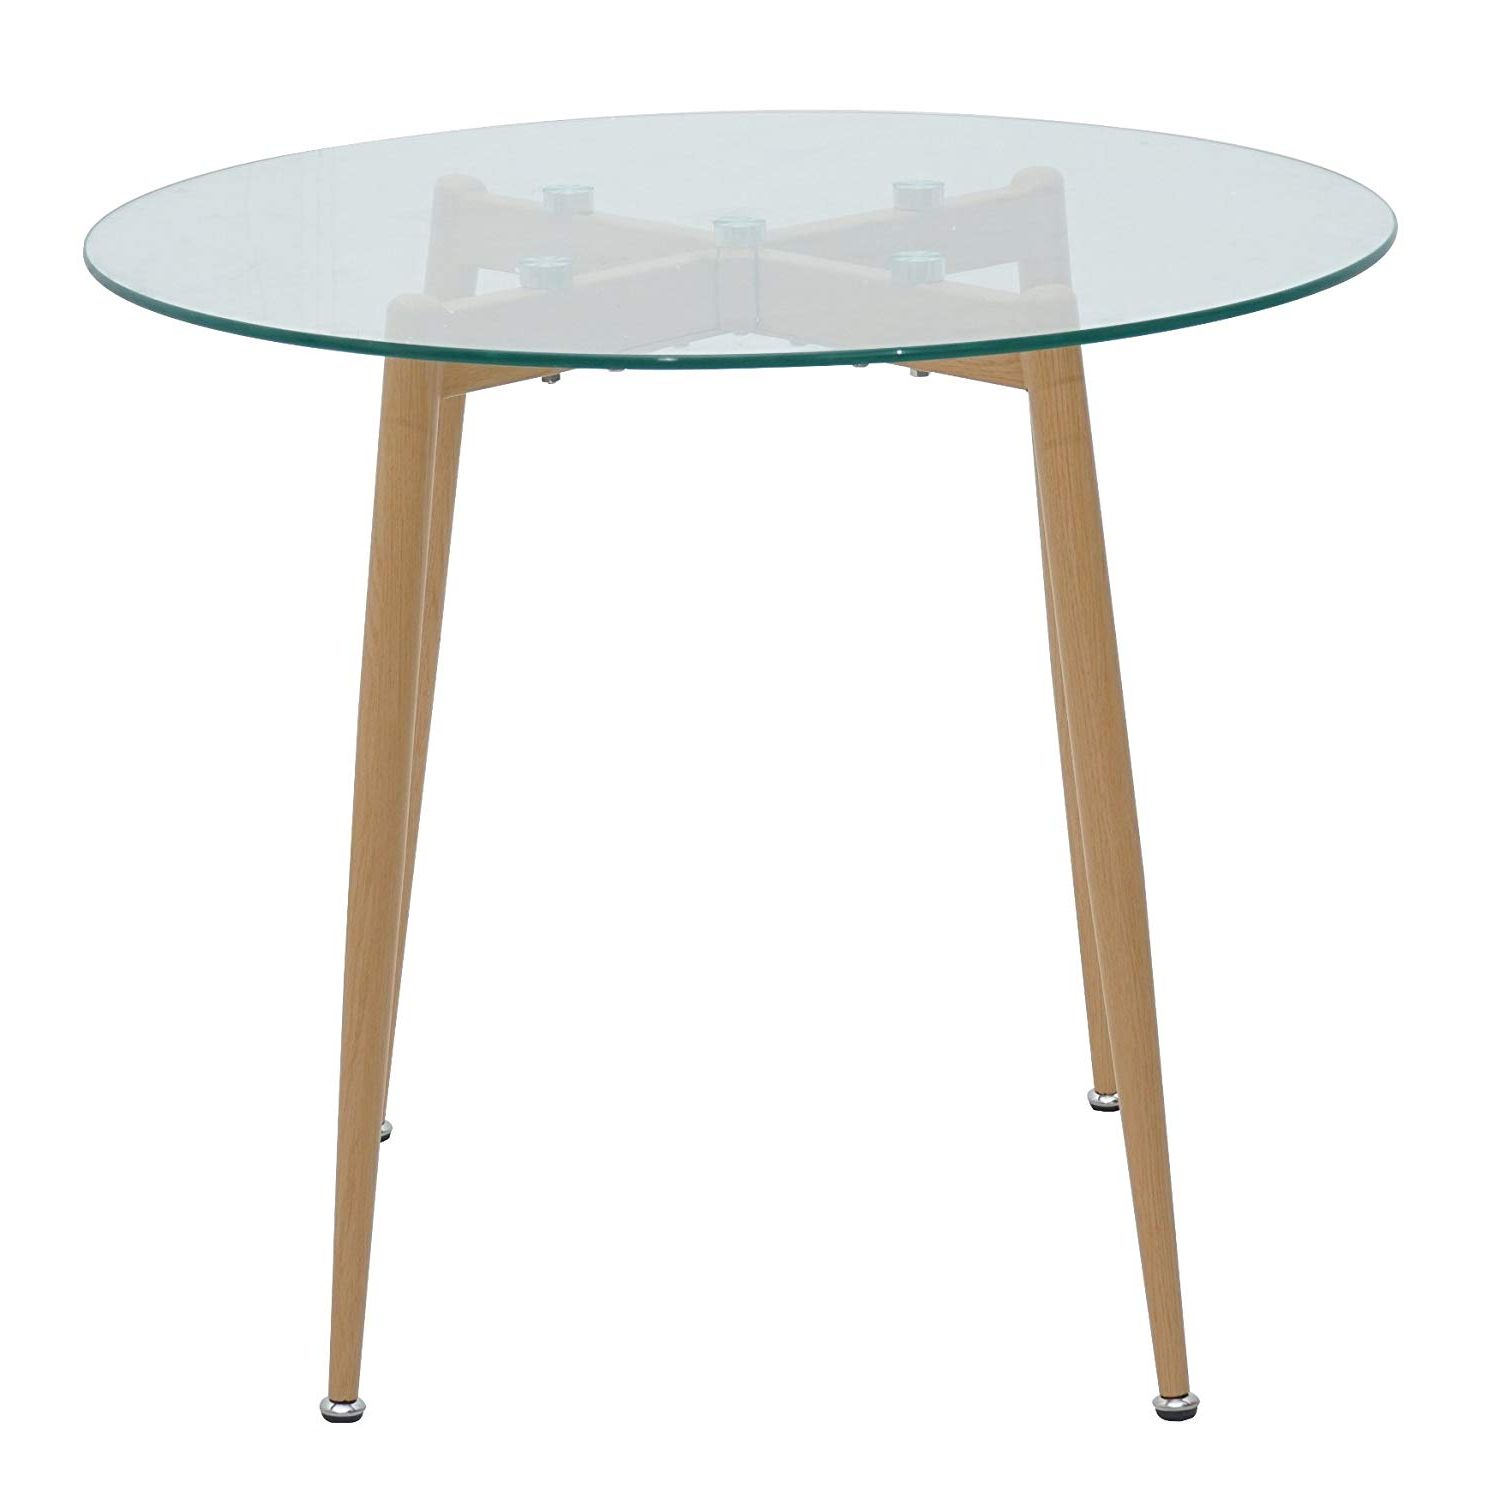 Current Green Spirit 90 X 75 Cm Wood Dining Table Glass Top Round Inside Retro Round Glasstop Dining Tables (View 5 of 25)